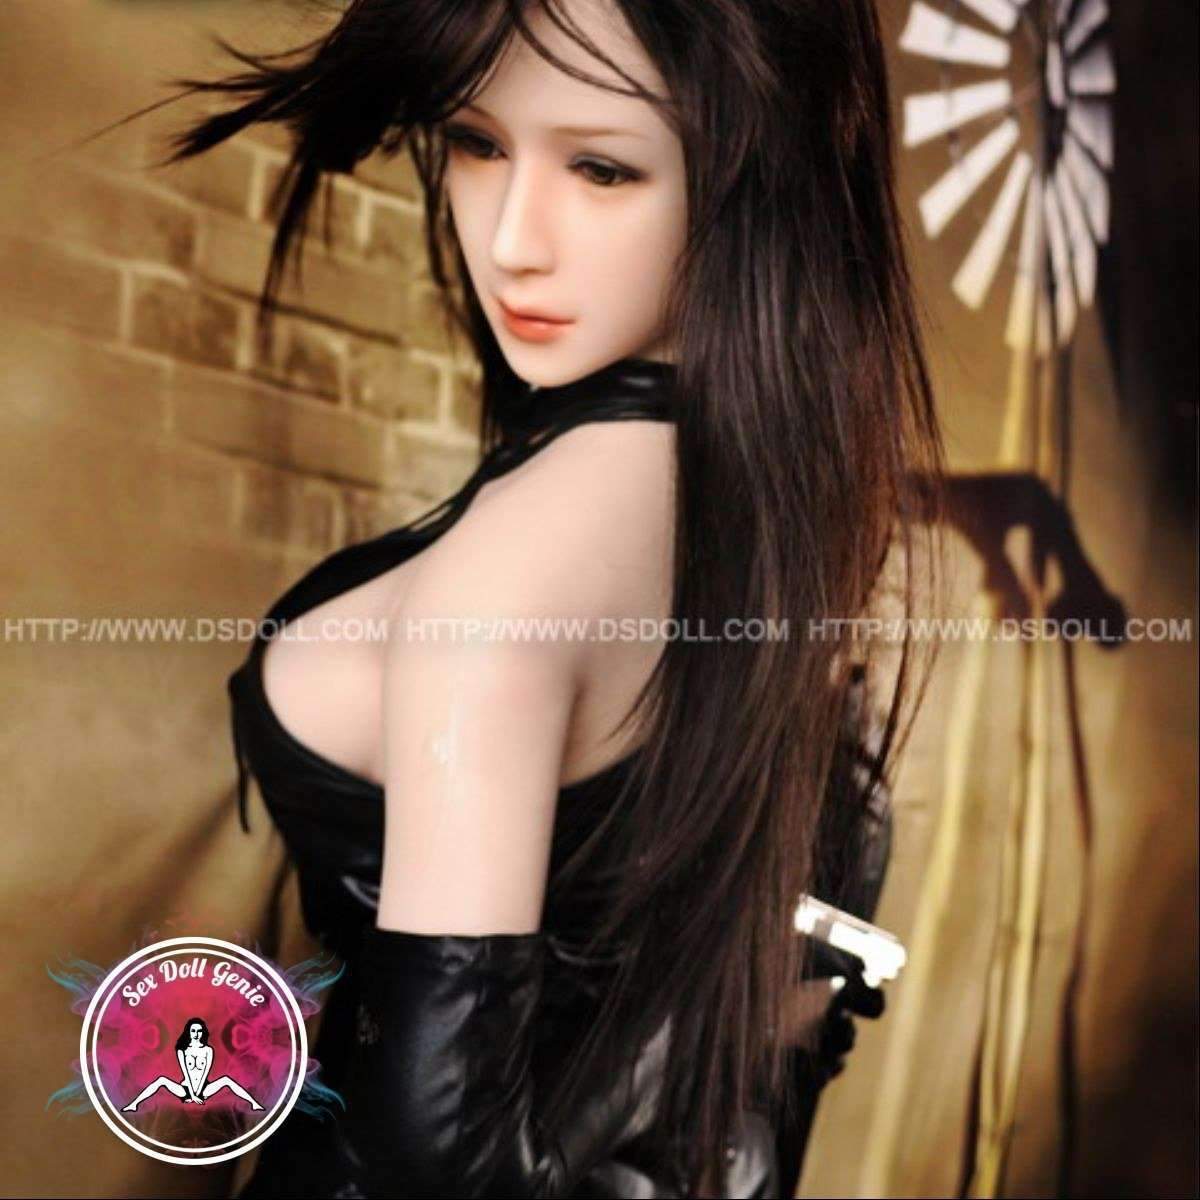 DS Doll - 158cm - Hanna Head - Type 1 D Cup Silicone Doll-1